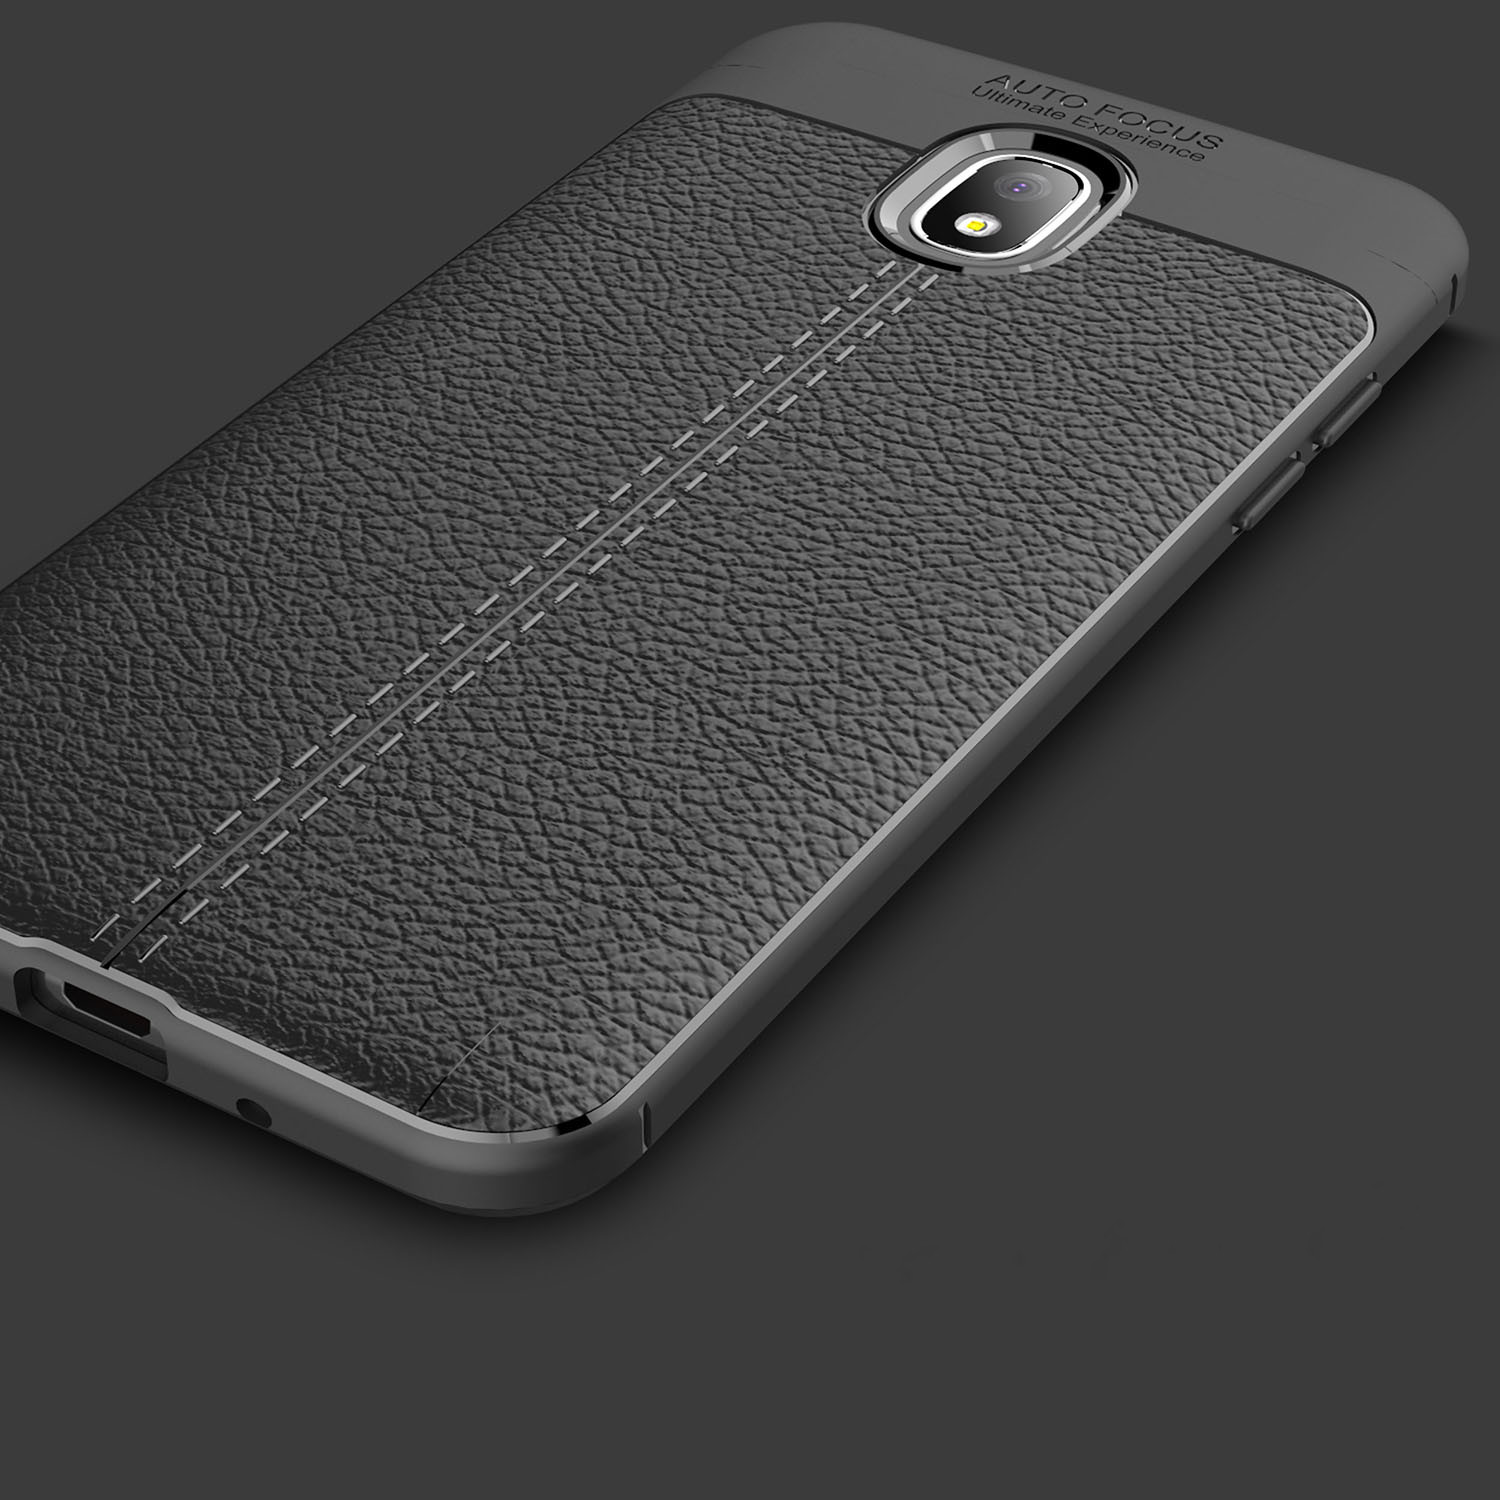 Bakeey-Litchi-Leather-Soft-TPU-Protective-Case-for-Samsung-Galaxy-J3-2018-US-Version-1312927-5